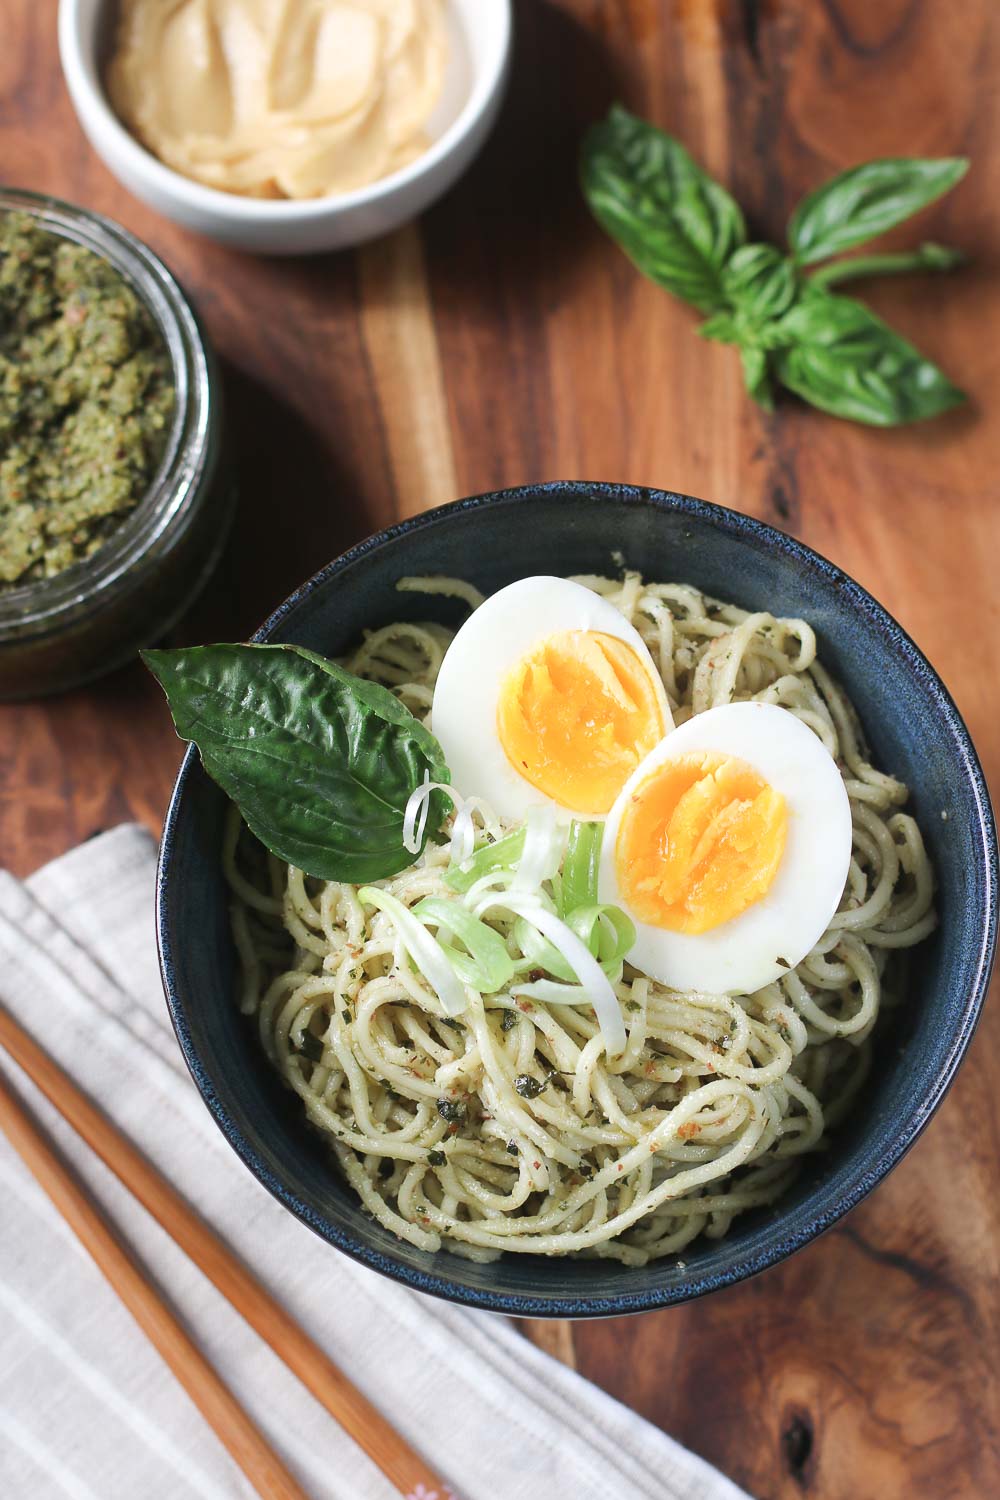 This miso pesto ramen is the perfect weeknight dinner. Easy to prepare, packed in healthy colorful veggies, and full of umami flavor.